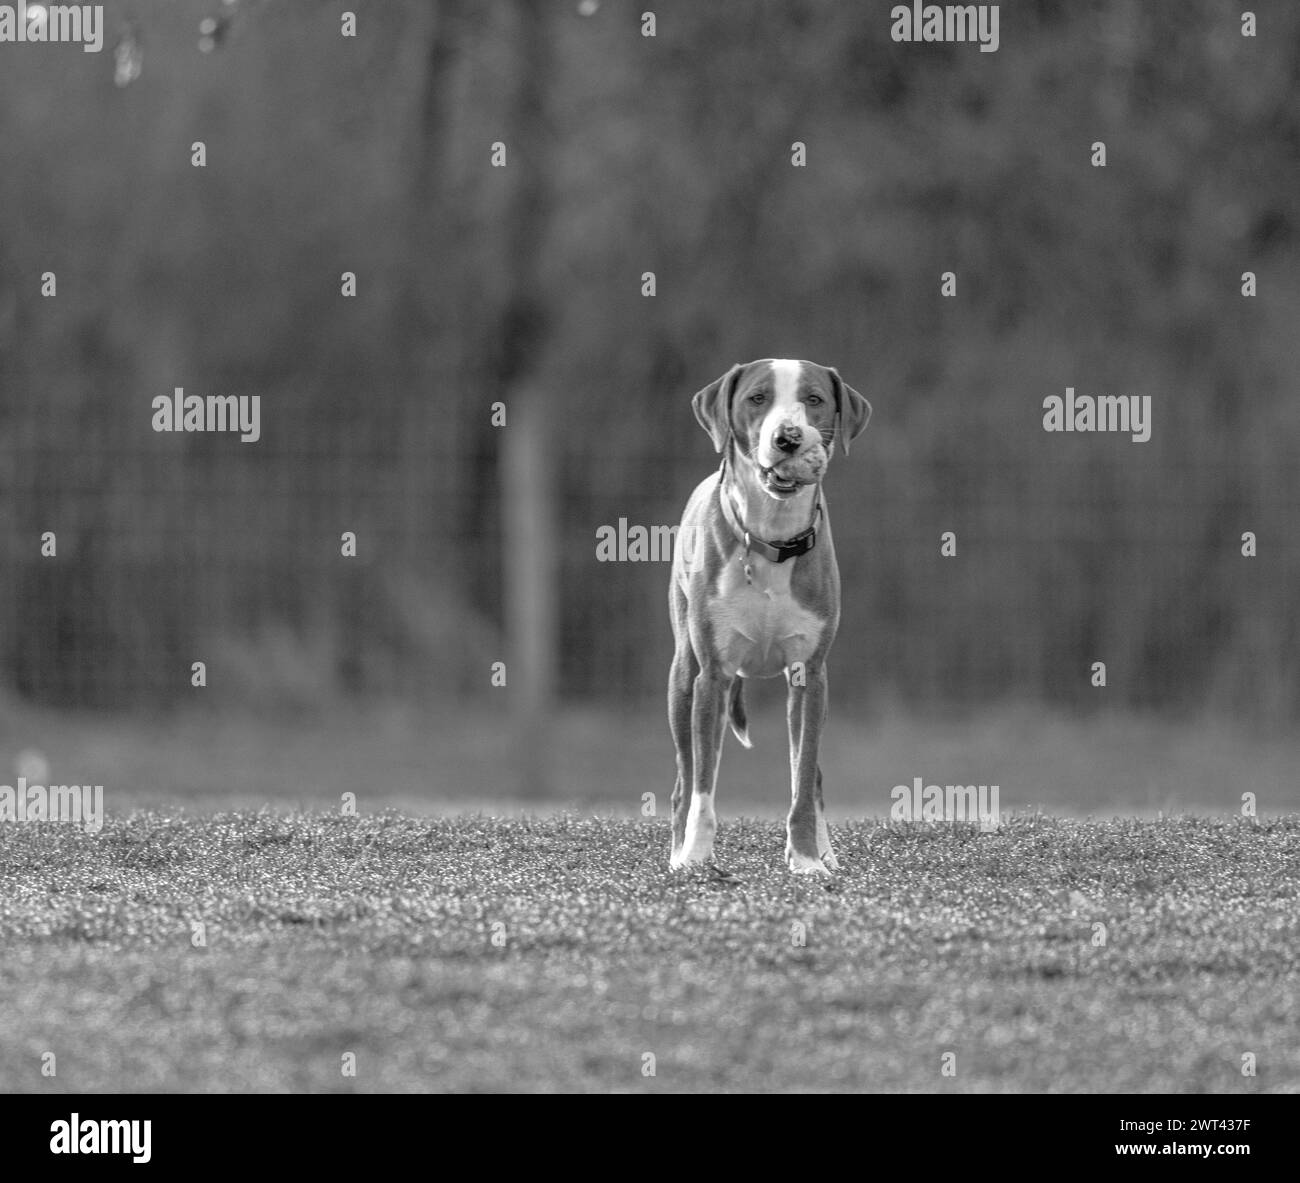 A dog joyfully running through a field towards the camera with its tongue hanging out Stock Photo